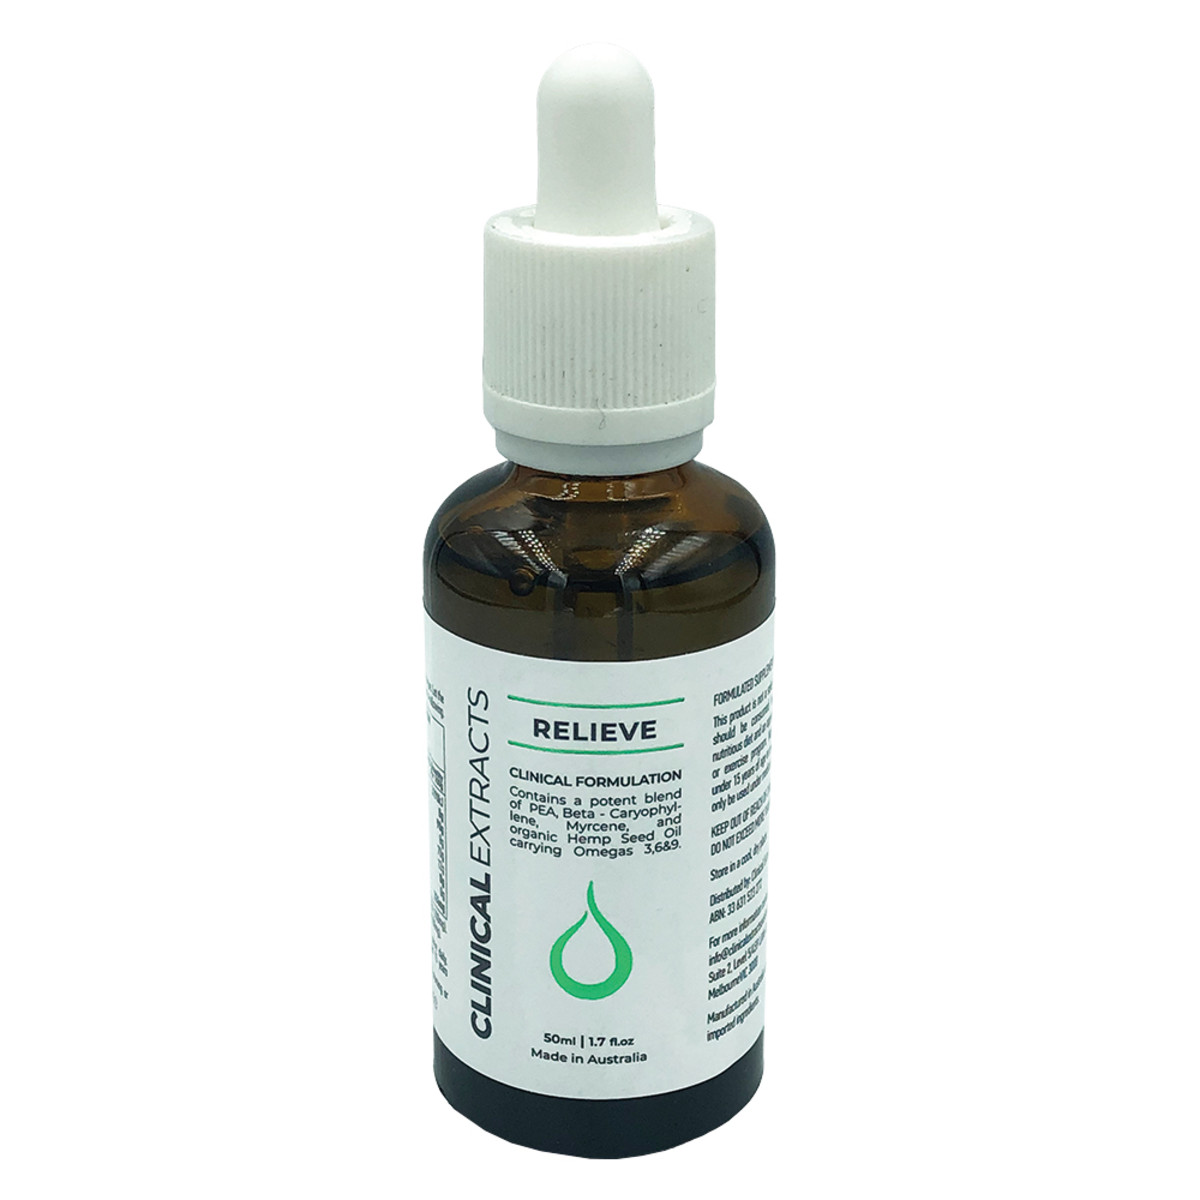 CLINICAL EXTRACTS – Clinical Formulation Relieve 50ml